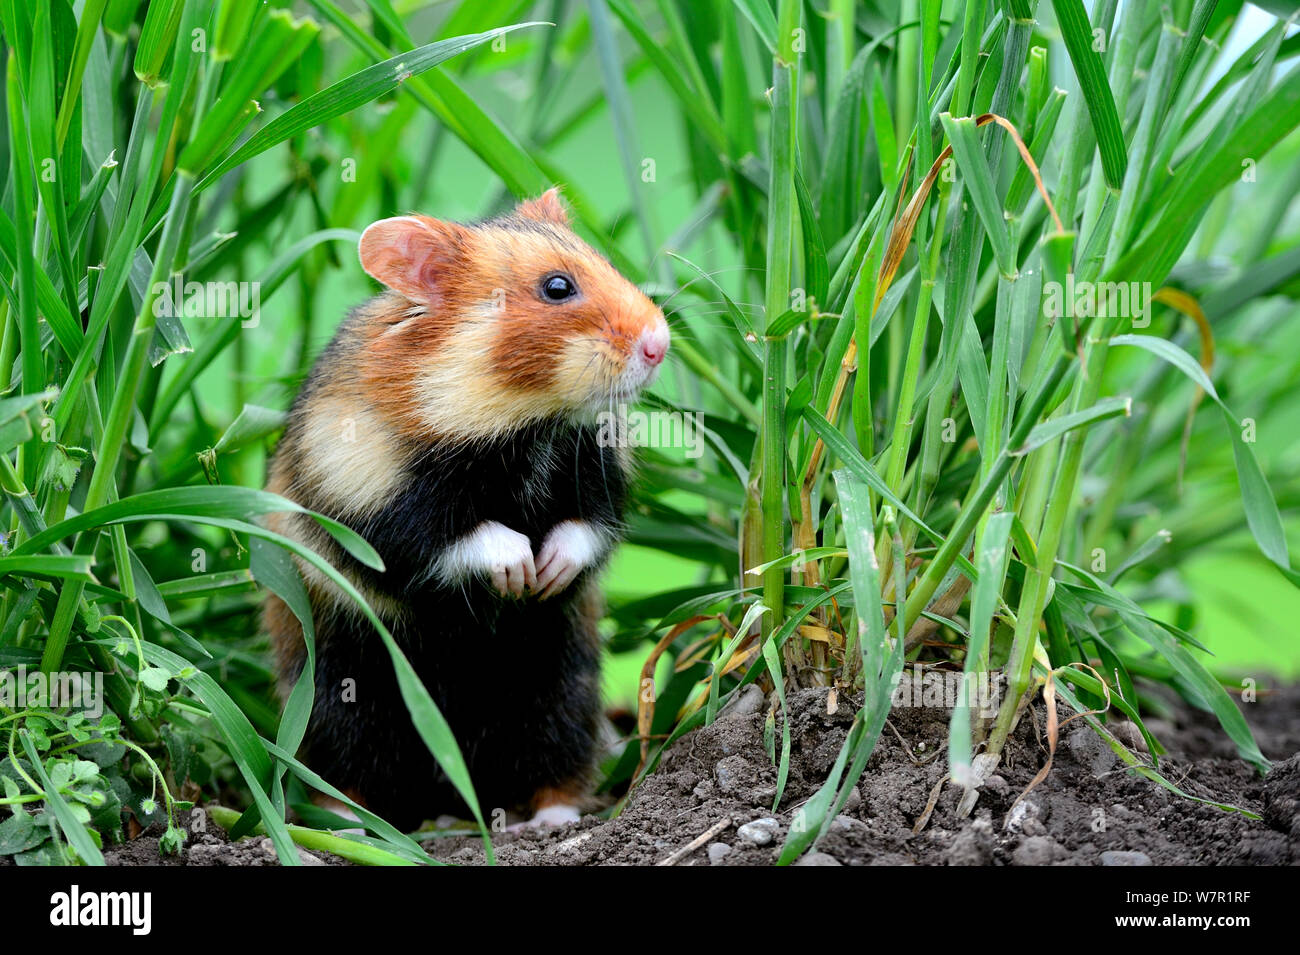 Common hamster (Cricetus cricetus) standing, Alsace, France, captive Stock Photo